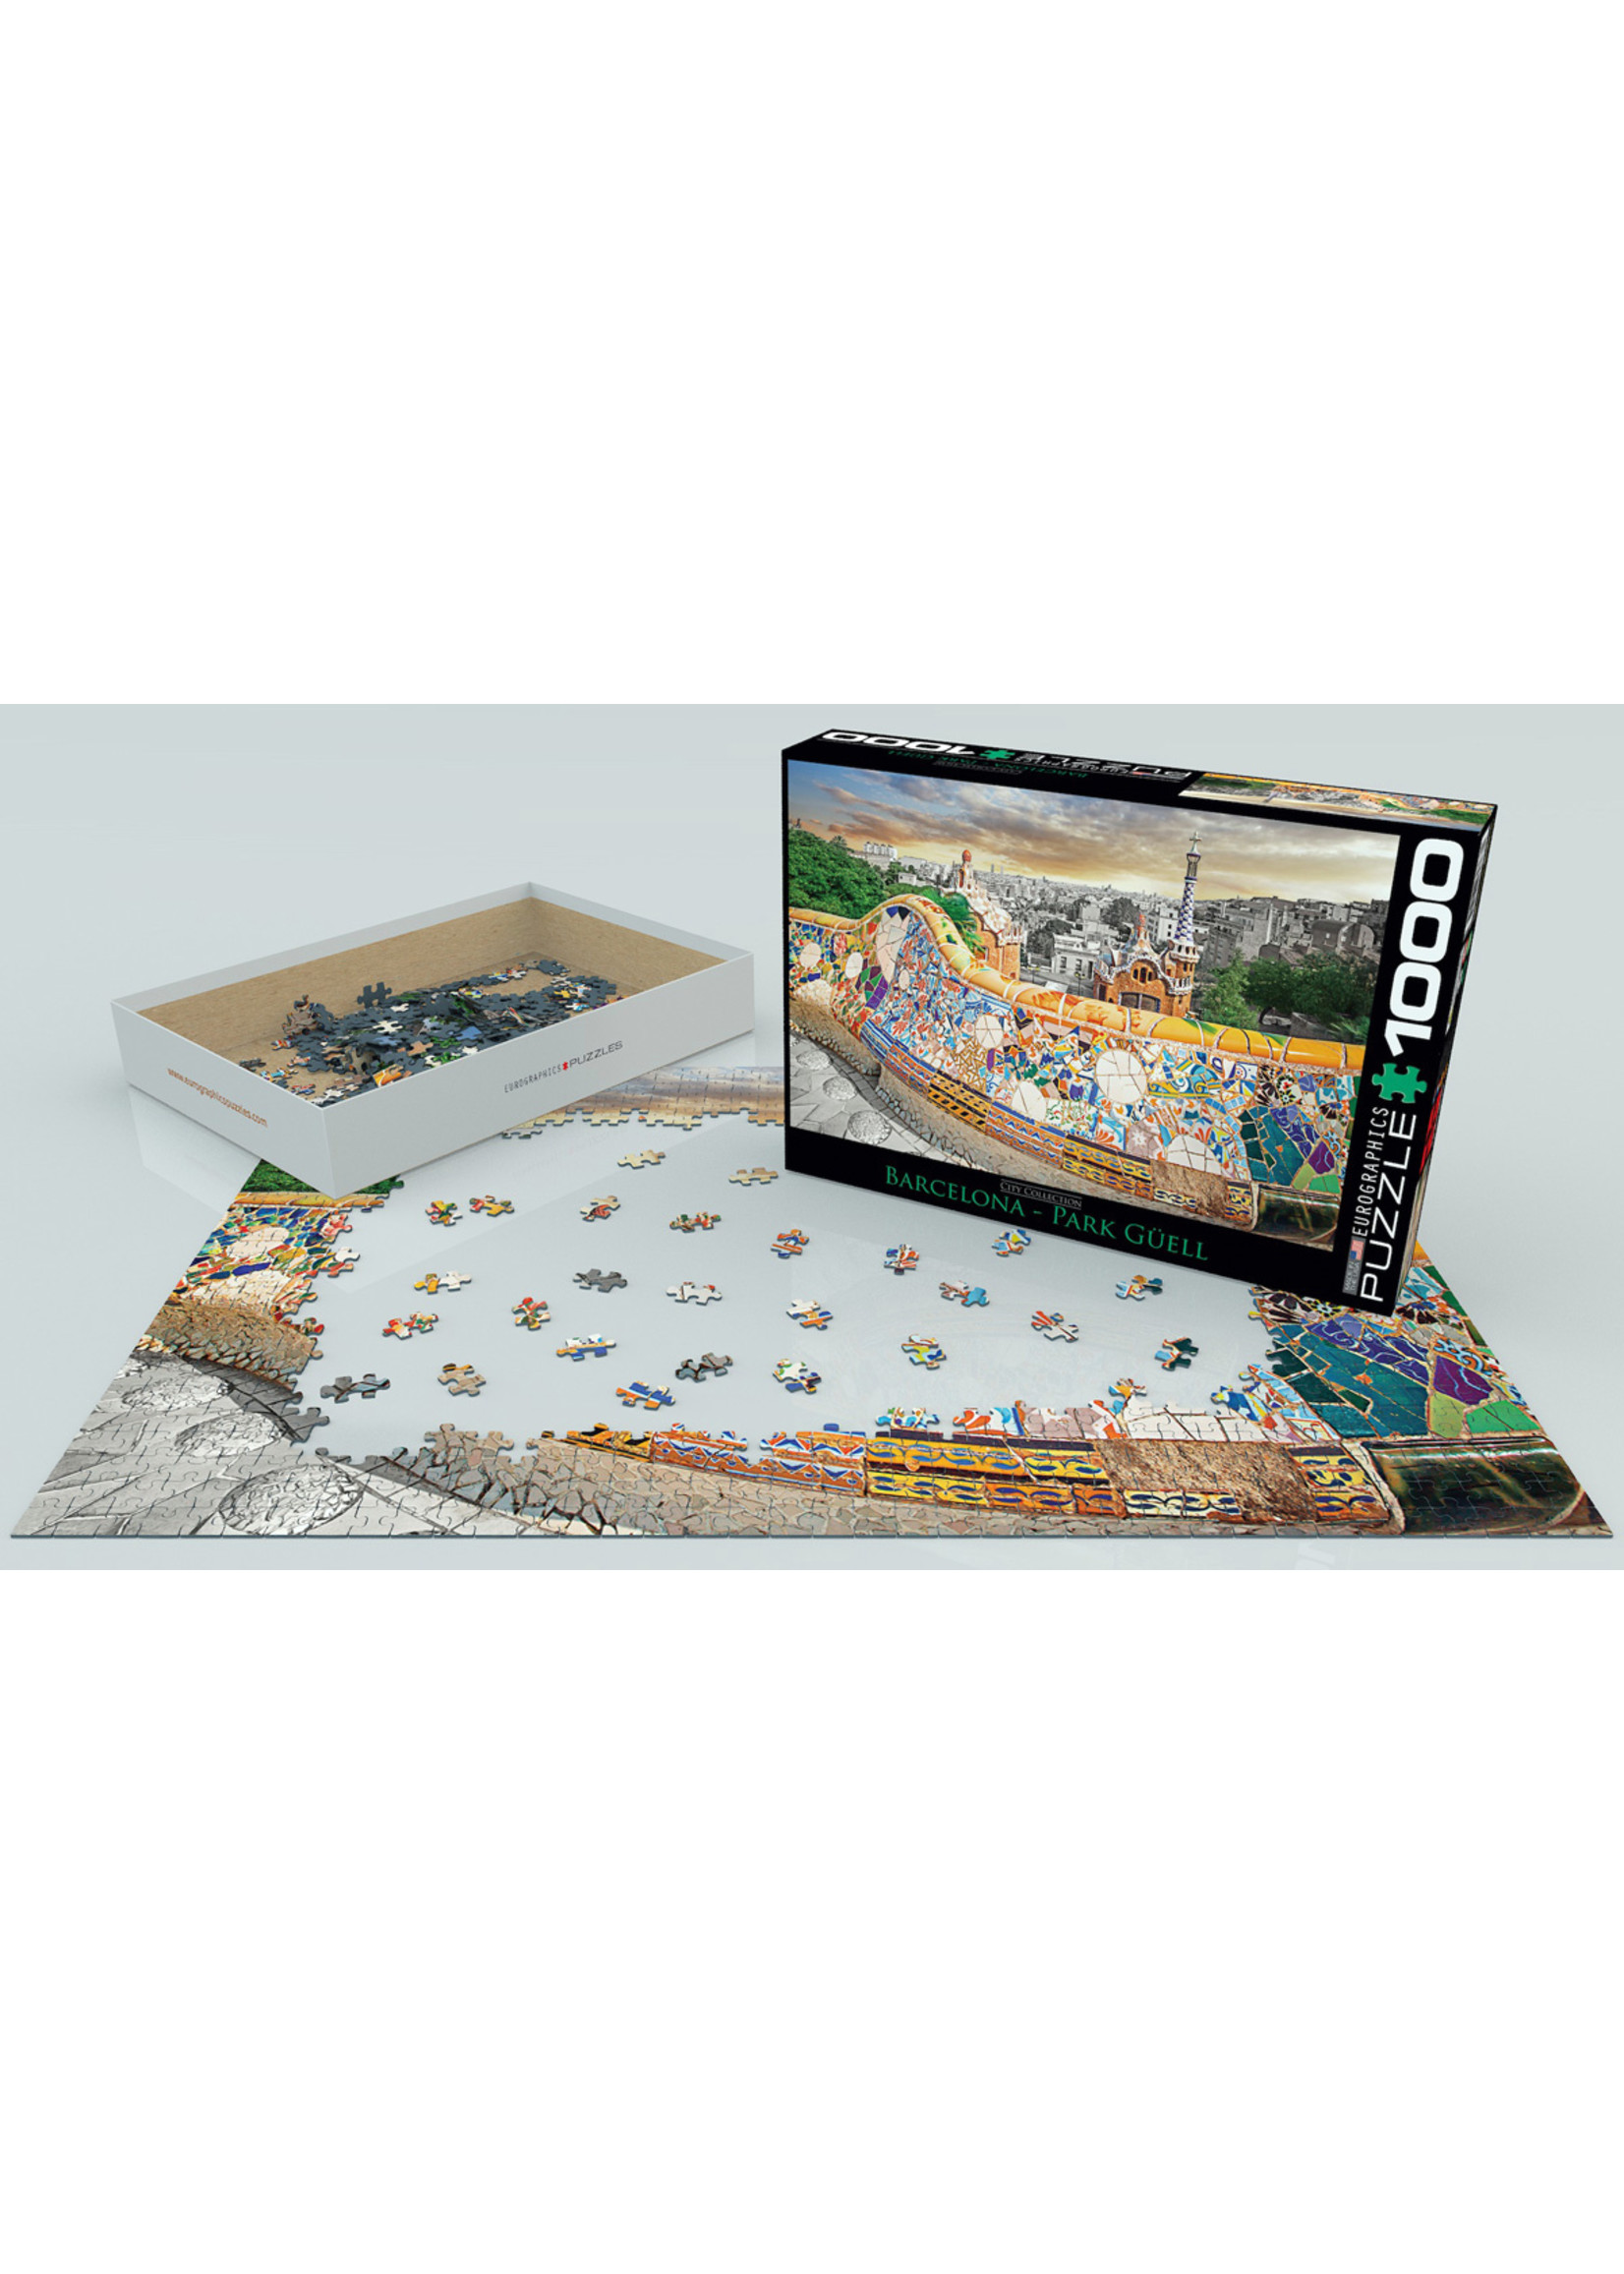 Eurographics "Barcelona Park Guell" 1000 Piece Puzzle